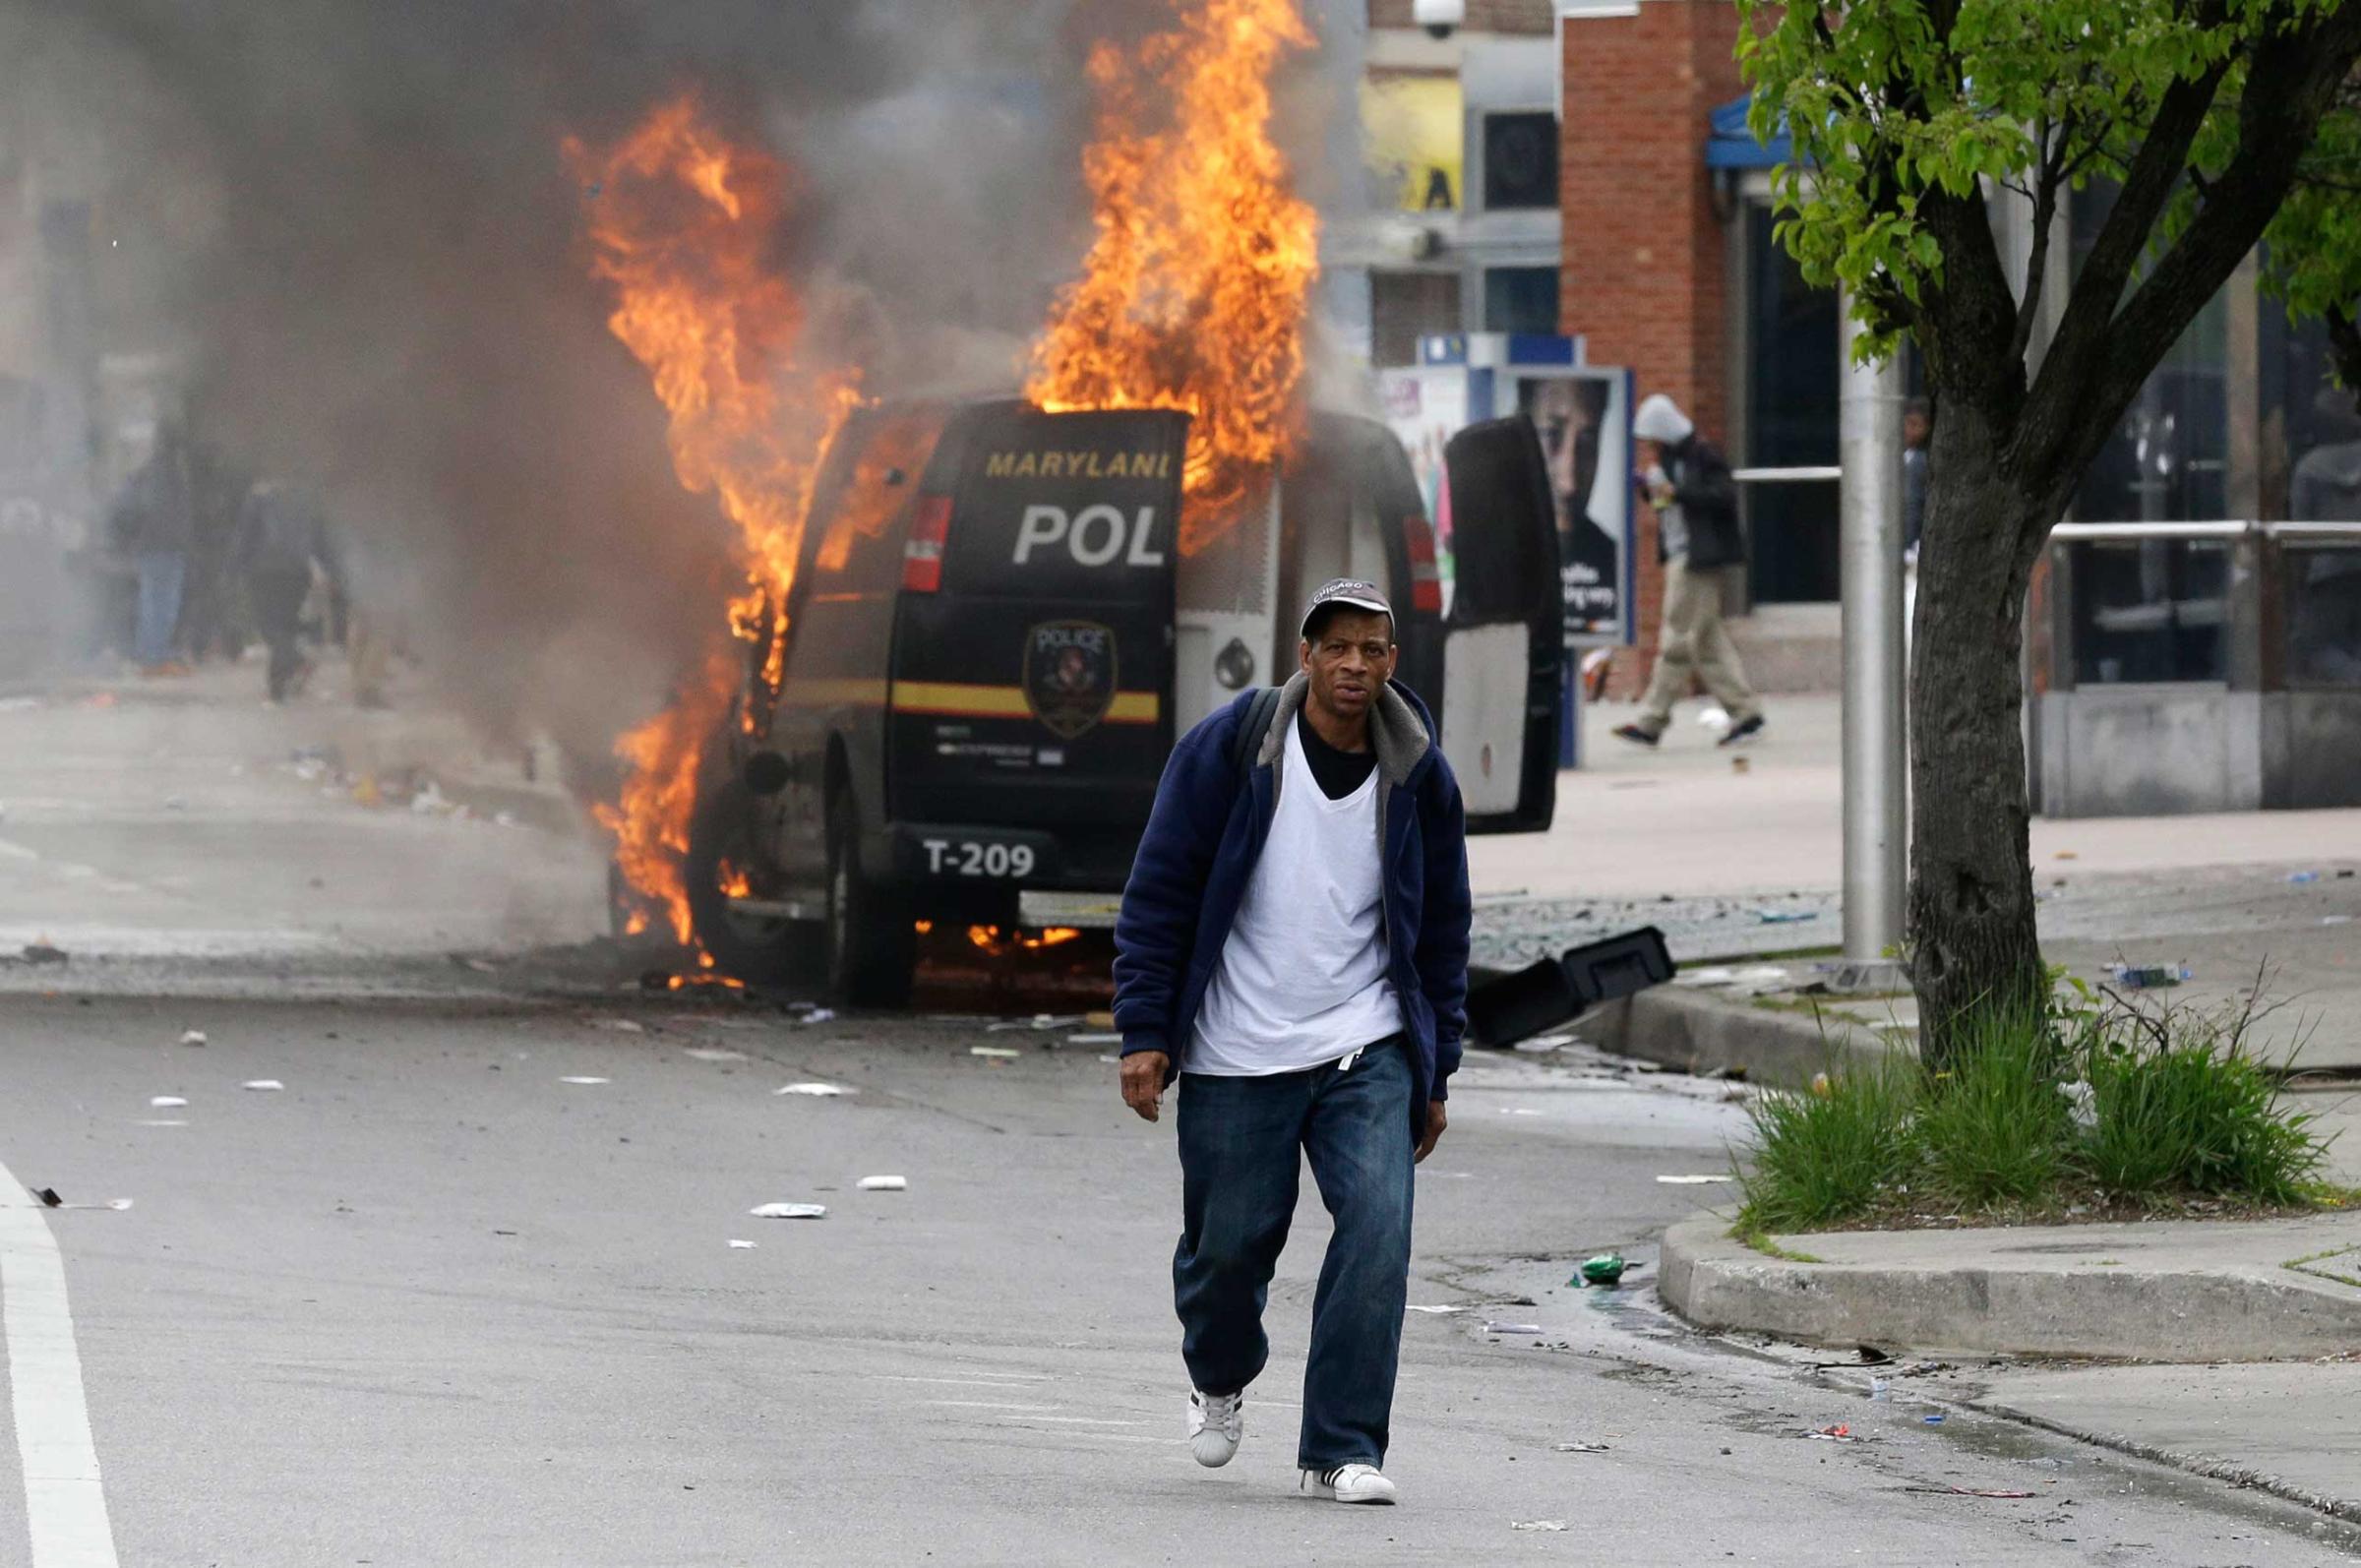 A man walks past a burning police vehicle in Baltimore on April 27, 2015.